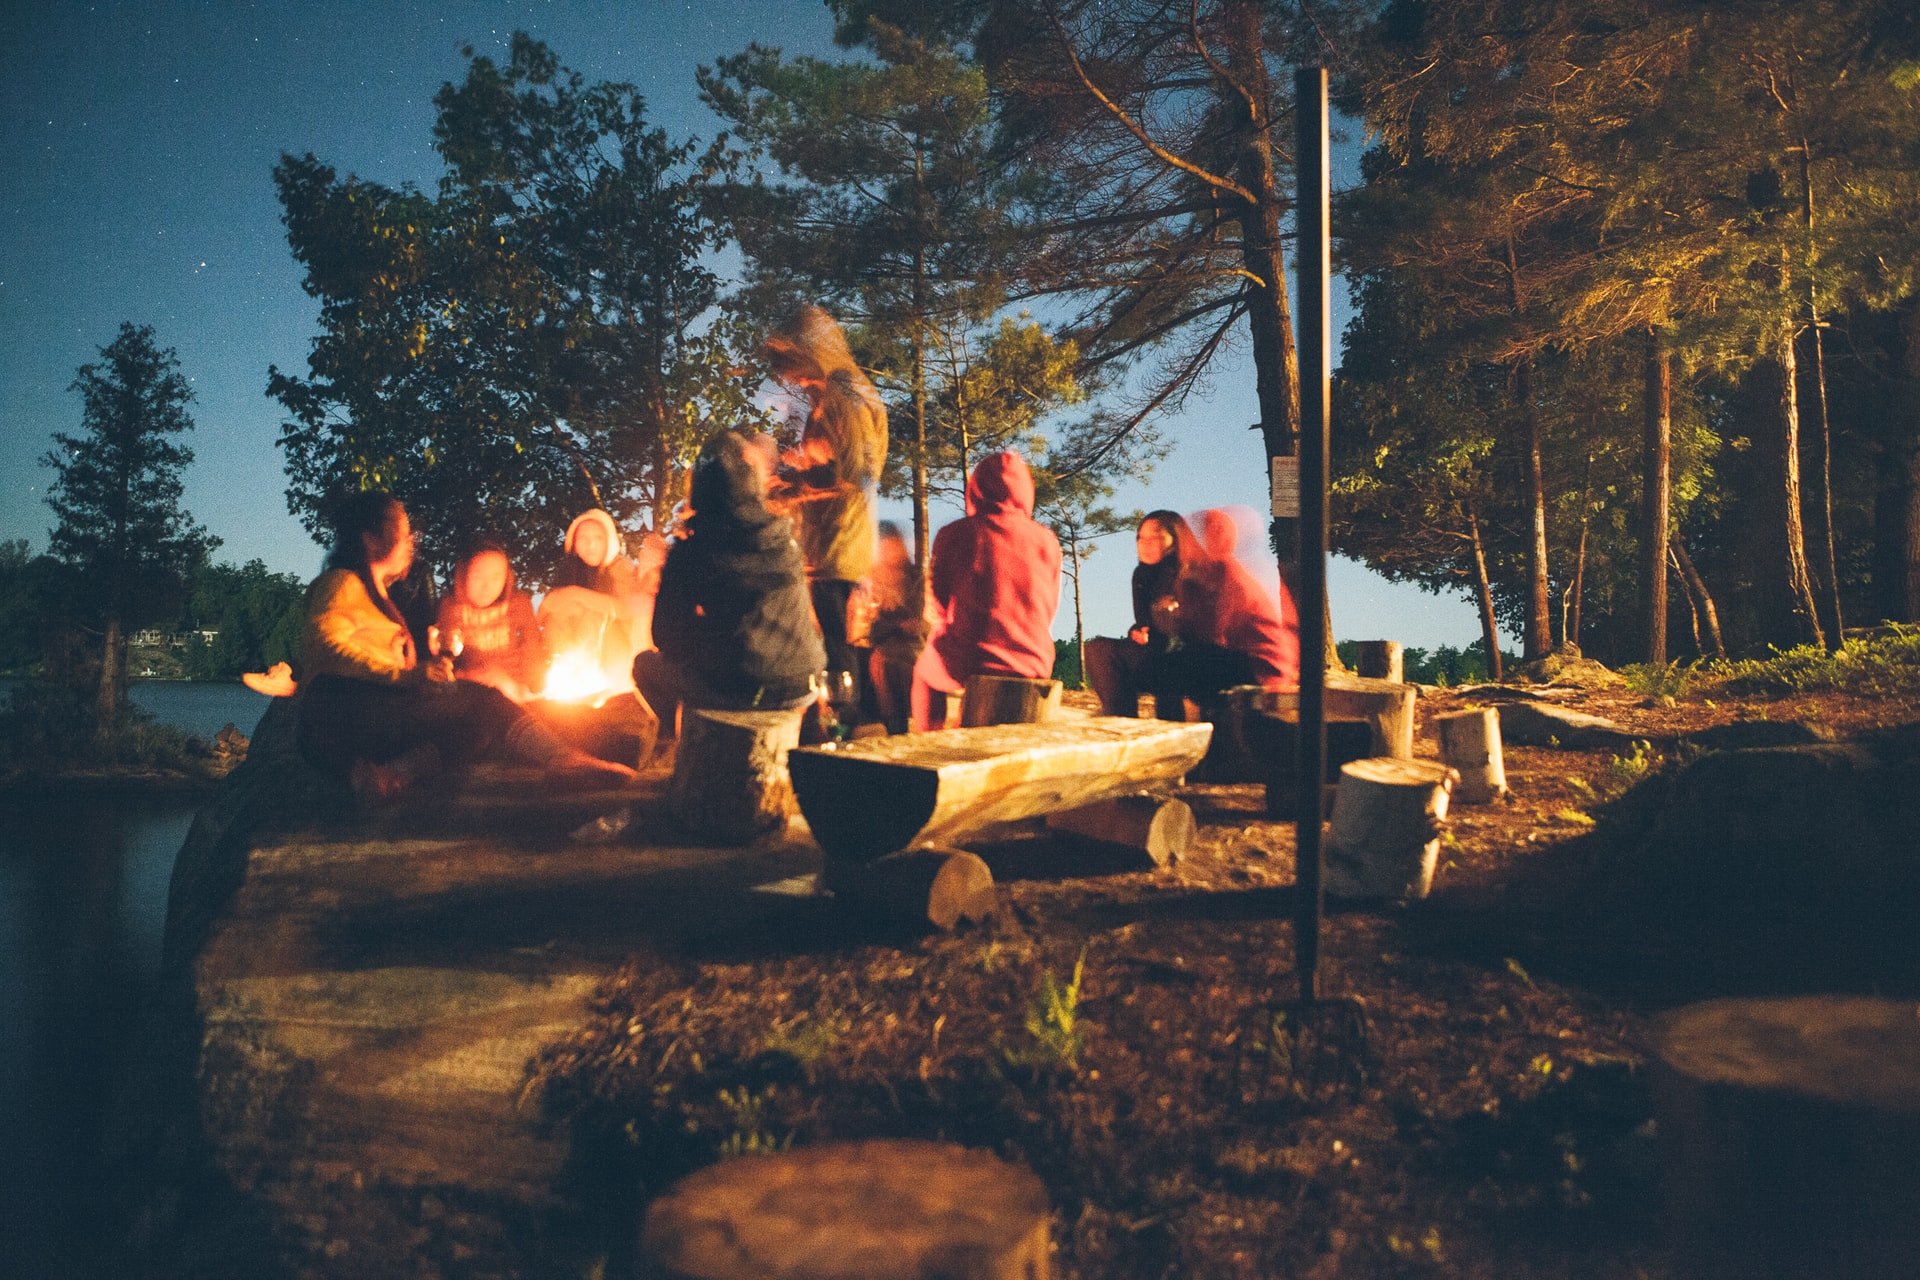 OP's father-in-law said they were going for camping | Source: Unsplash